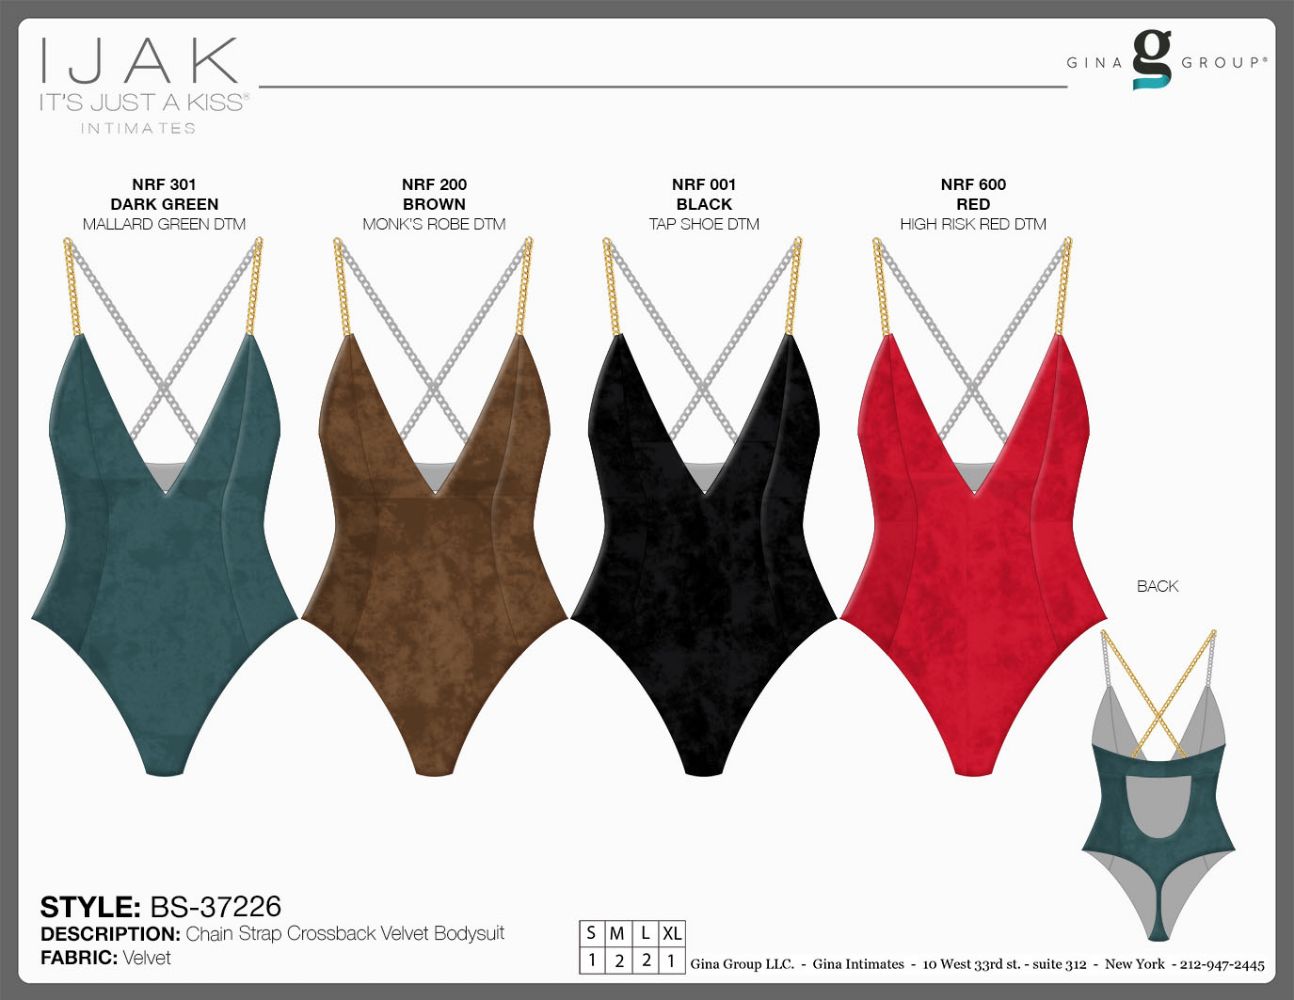 Offsite Sale of 4 pallets of brand new iJak body suits total RRP $258,000 at just a £5,000 start